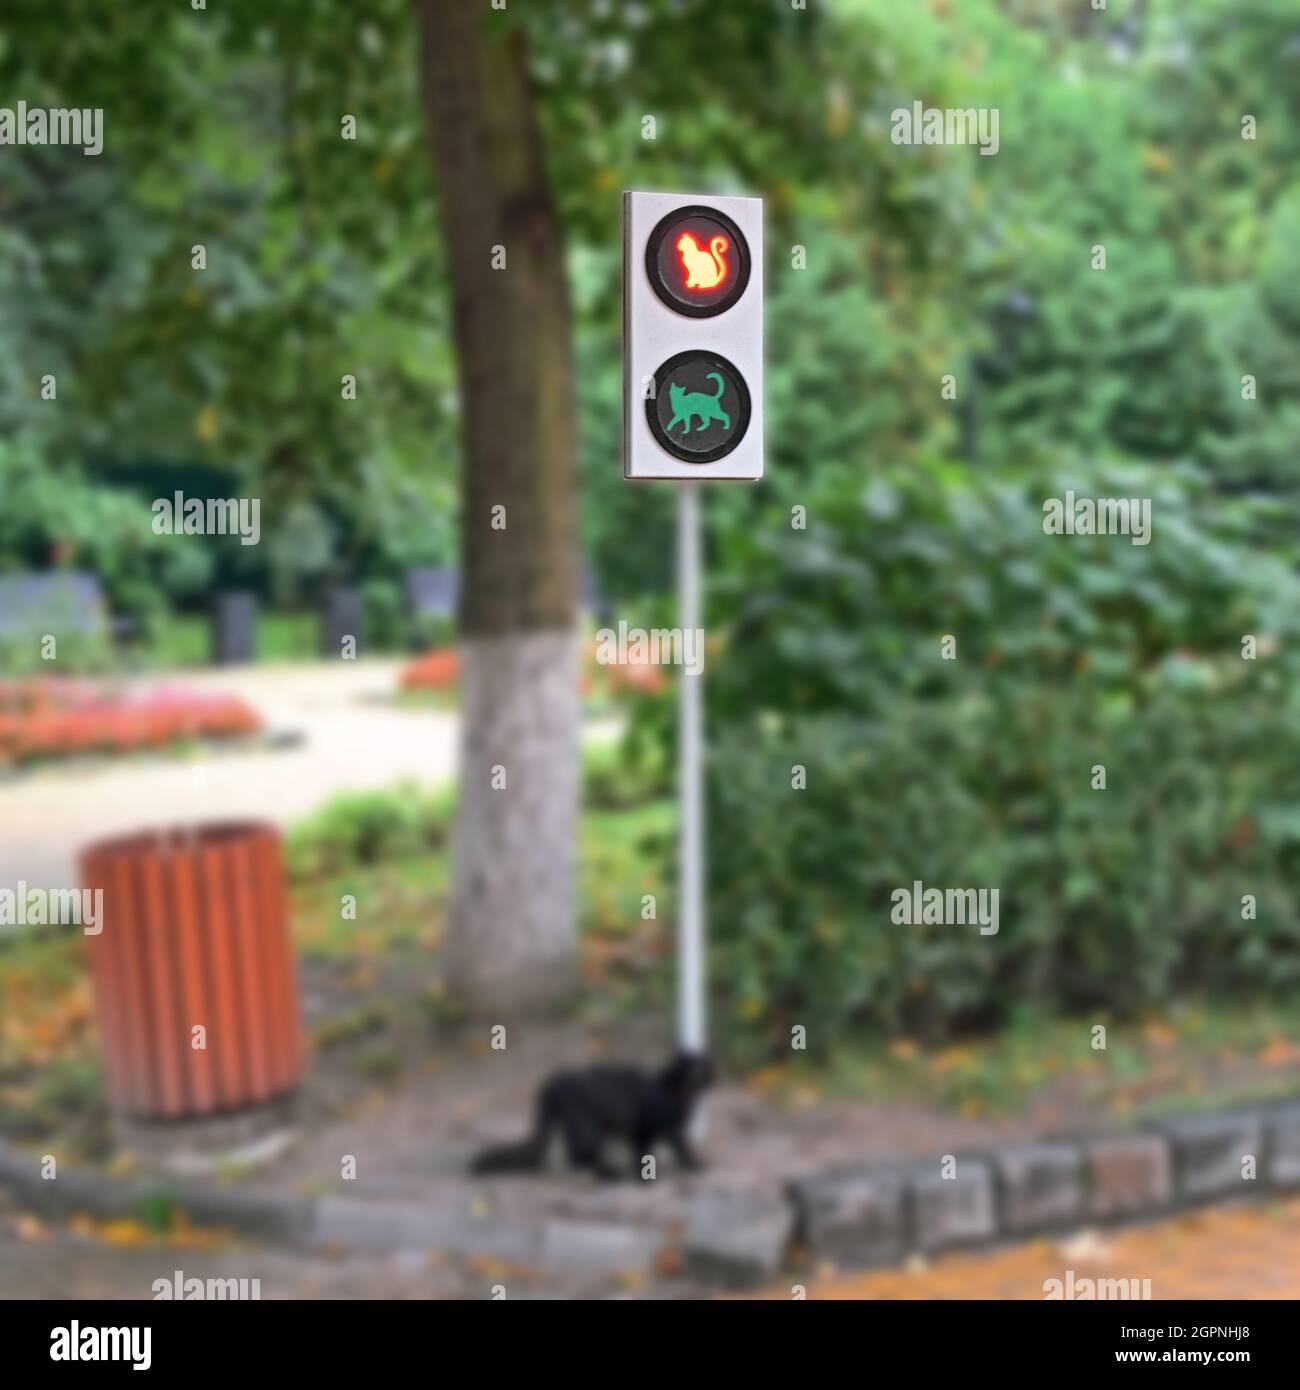 Taking care of pets. Traffic light with a silhouette of a cat. Kaliningrad region. Blurred greenery background, copy space for your design. Stock Photo